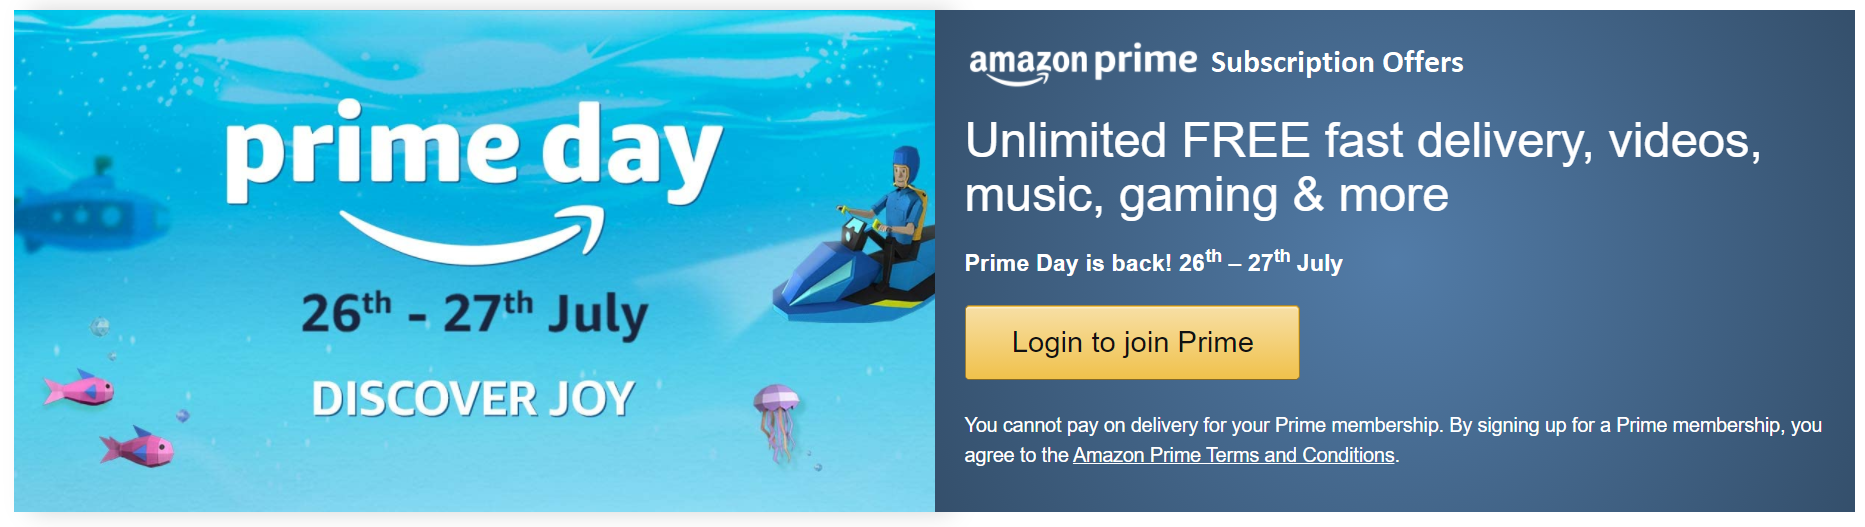 Best Amazon Prime Subscription Offers for Prime Day Sale 2021 (26-27 July)